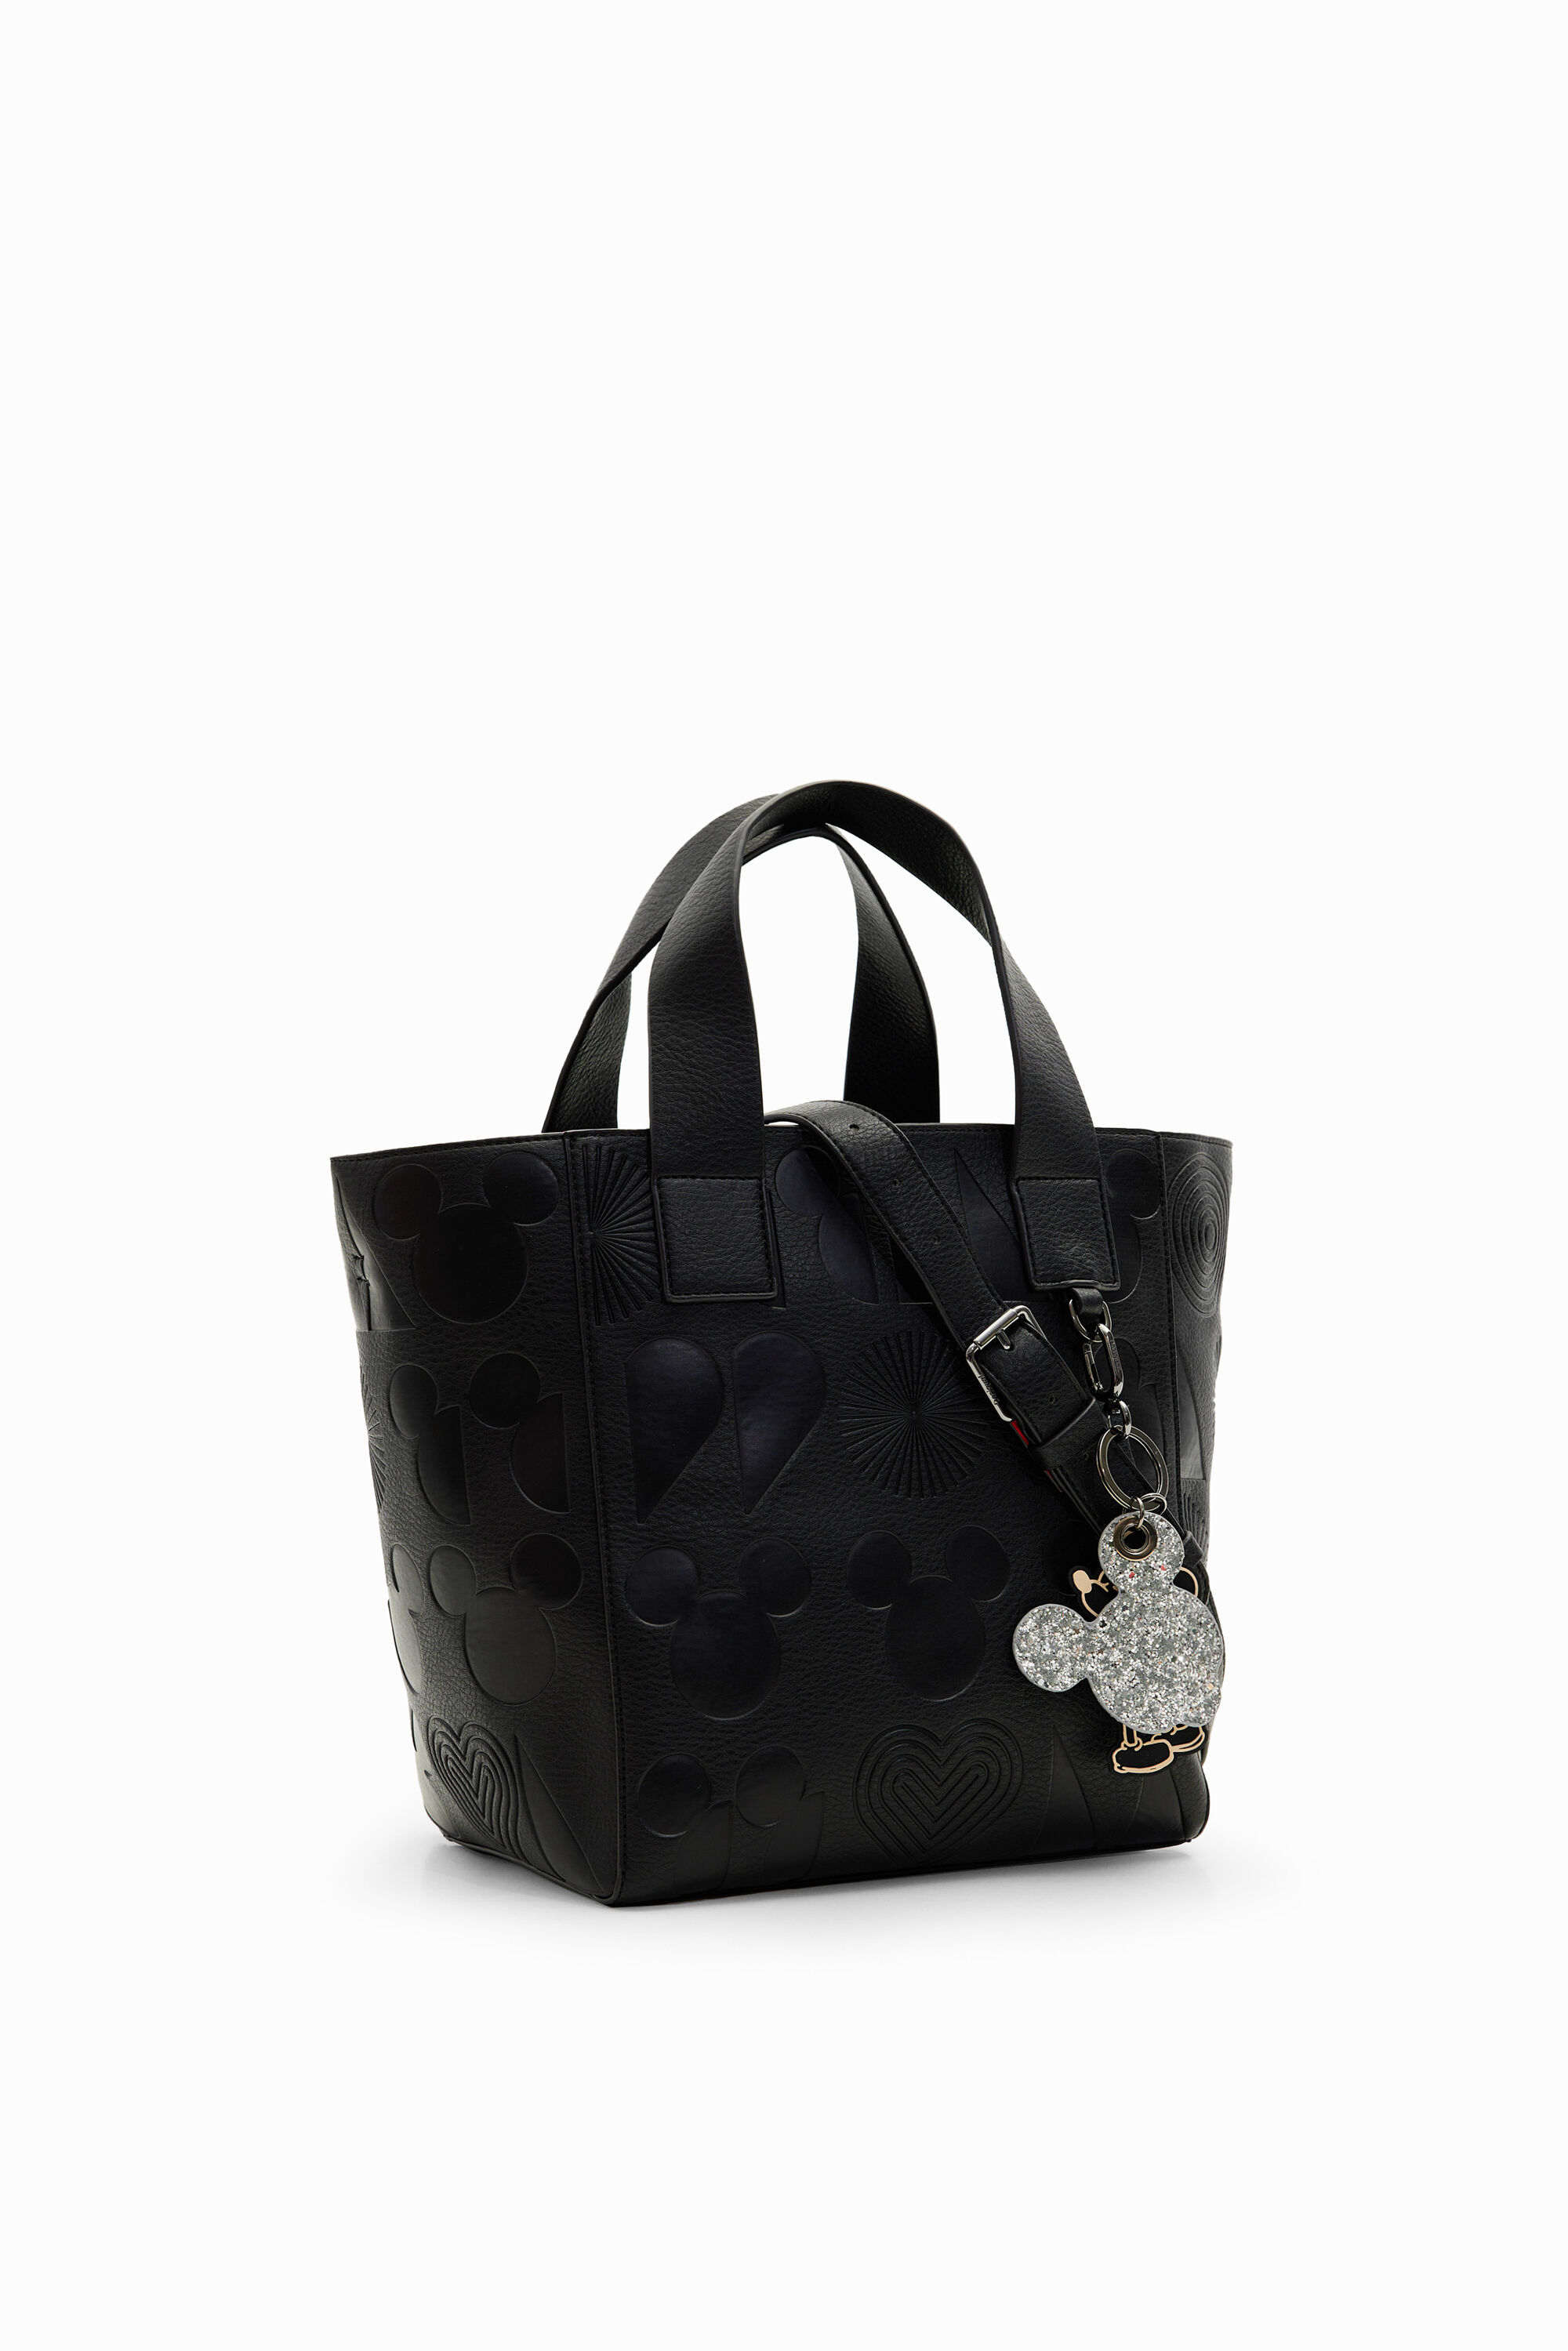 M Mickey Mouse tote bag